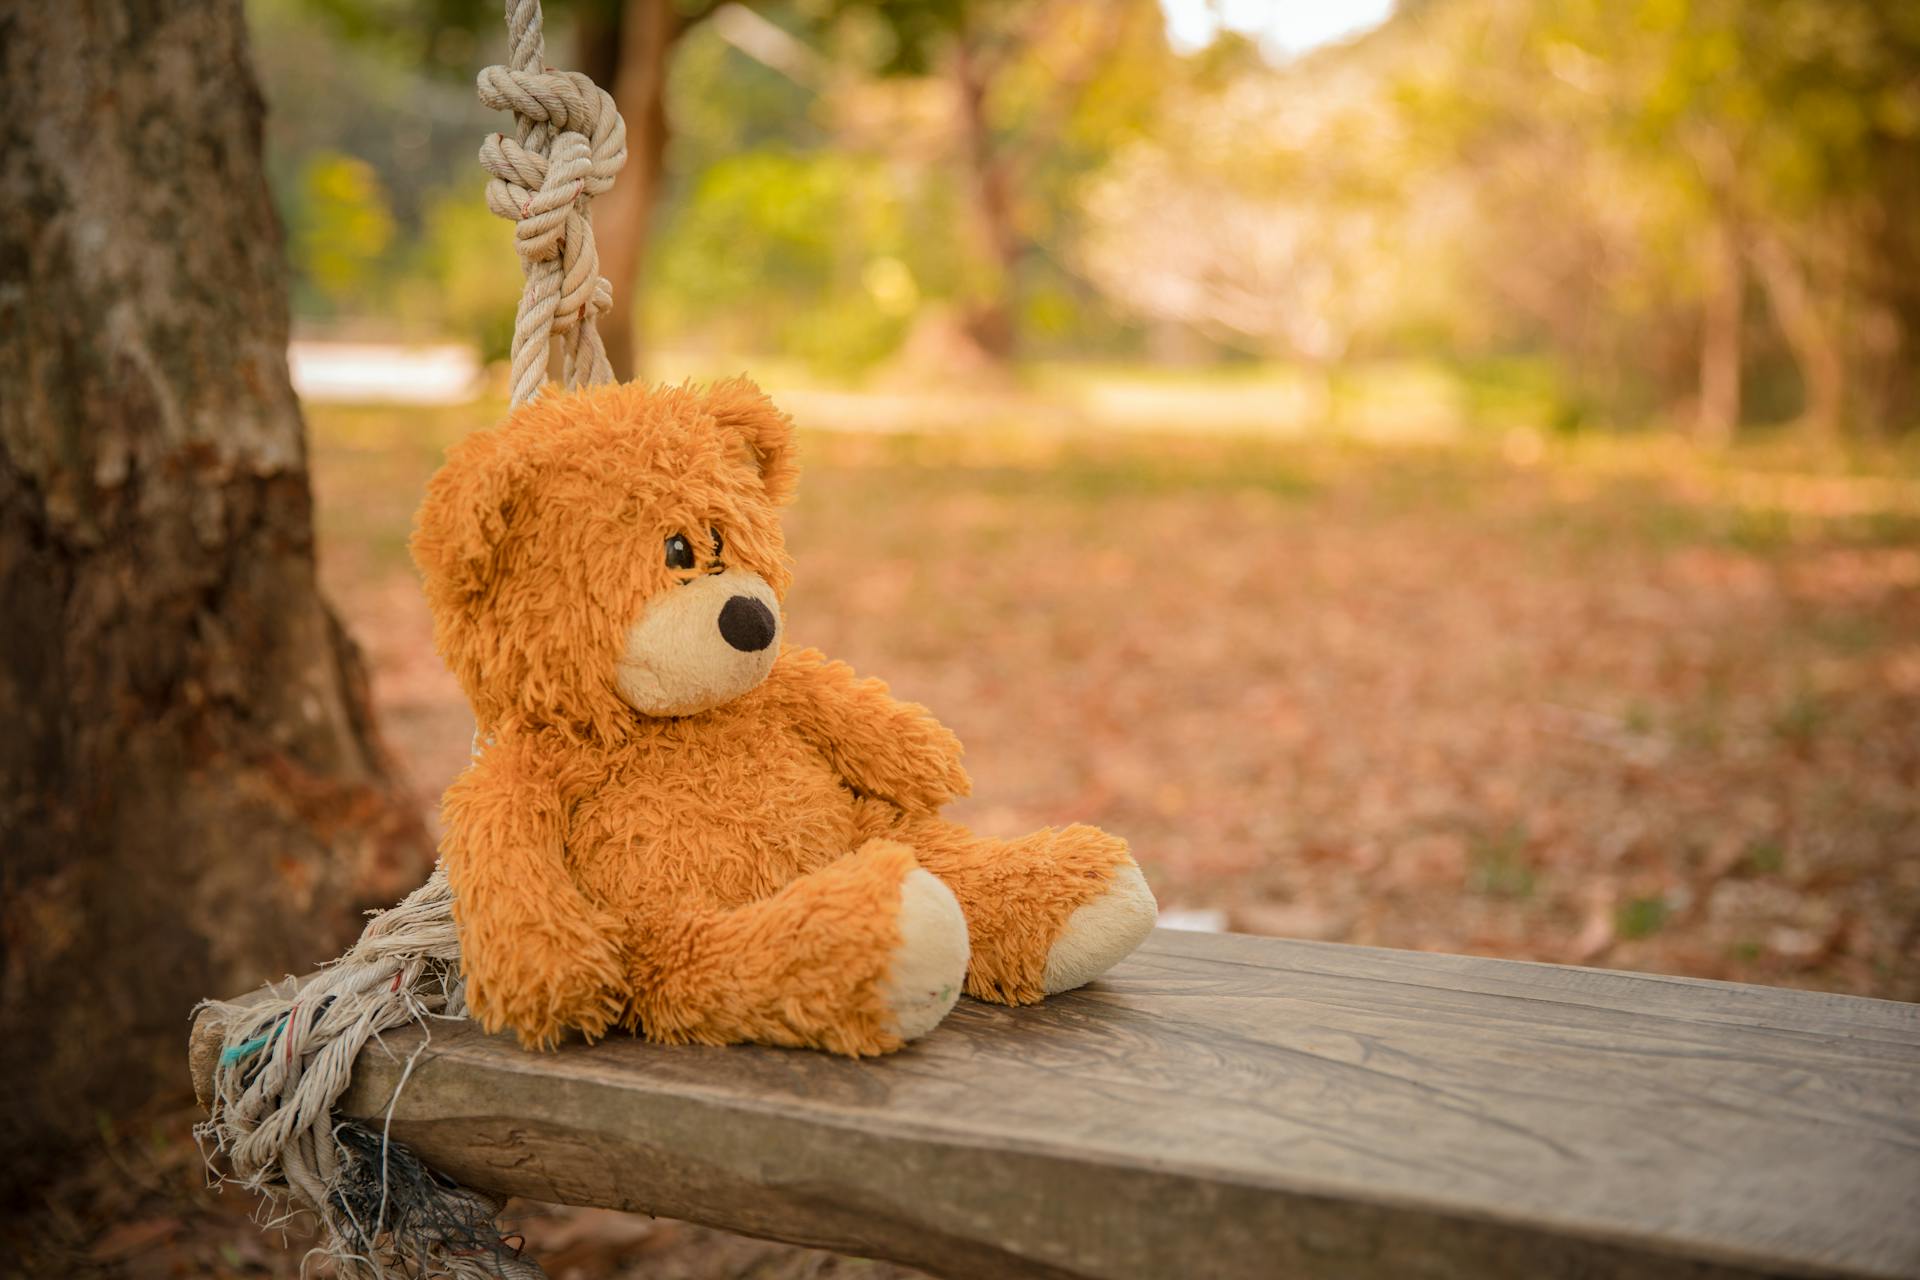 A close-up of a teddy bear on a wooden swing | Source: Pexels